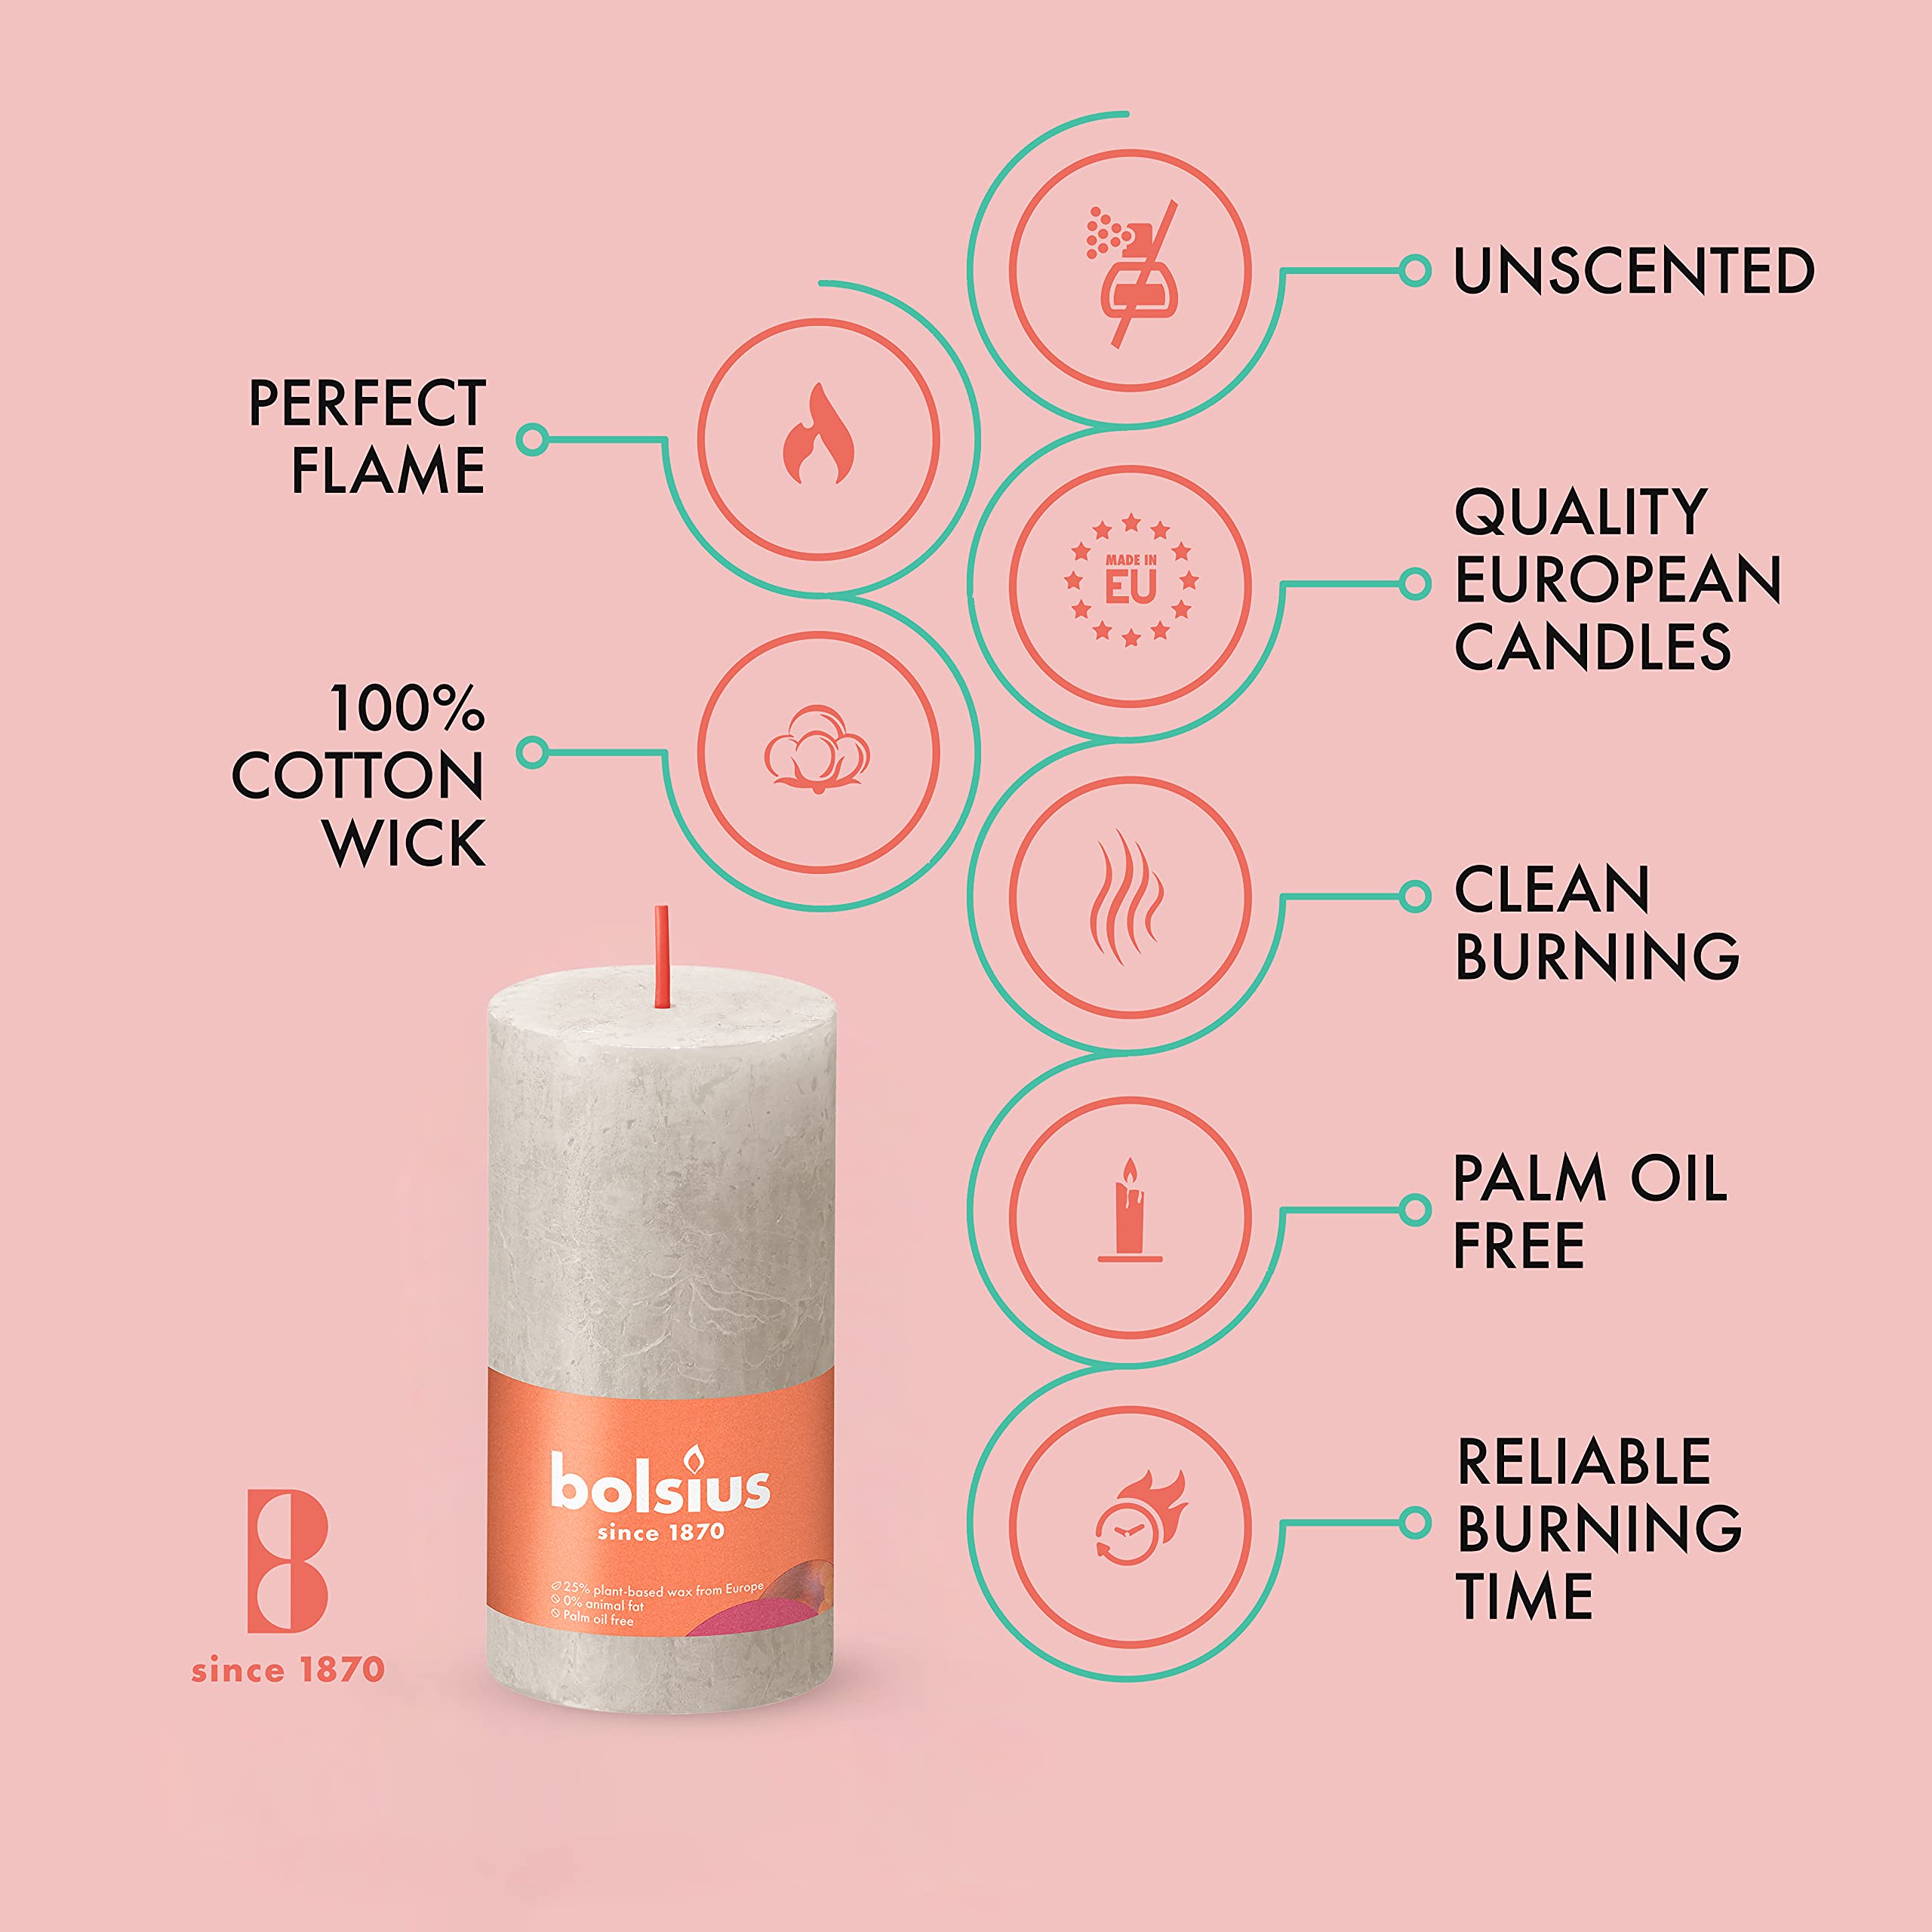 BOLSIUS 4 Pack Gray Rustic Pillar Candles - 2 X 4 Inches - Premium European Quality - Includes Natural Plant-Based Wax - Unscented Dripless Smokeless 30 Hour Party D�cor and Wedding Candles  - Like New